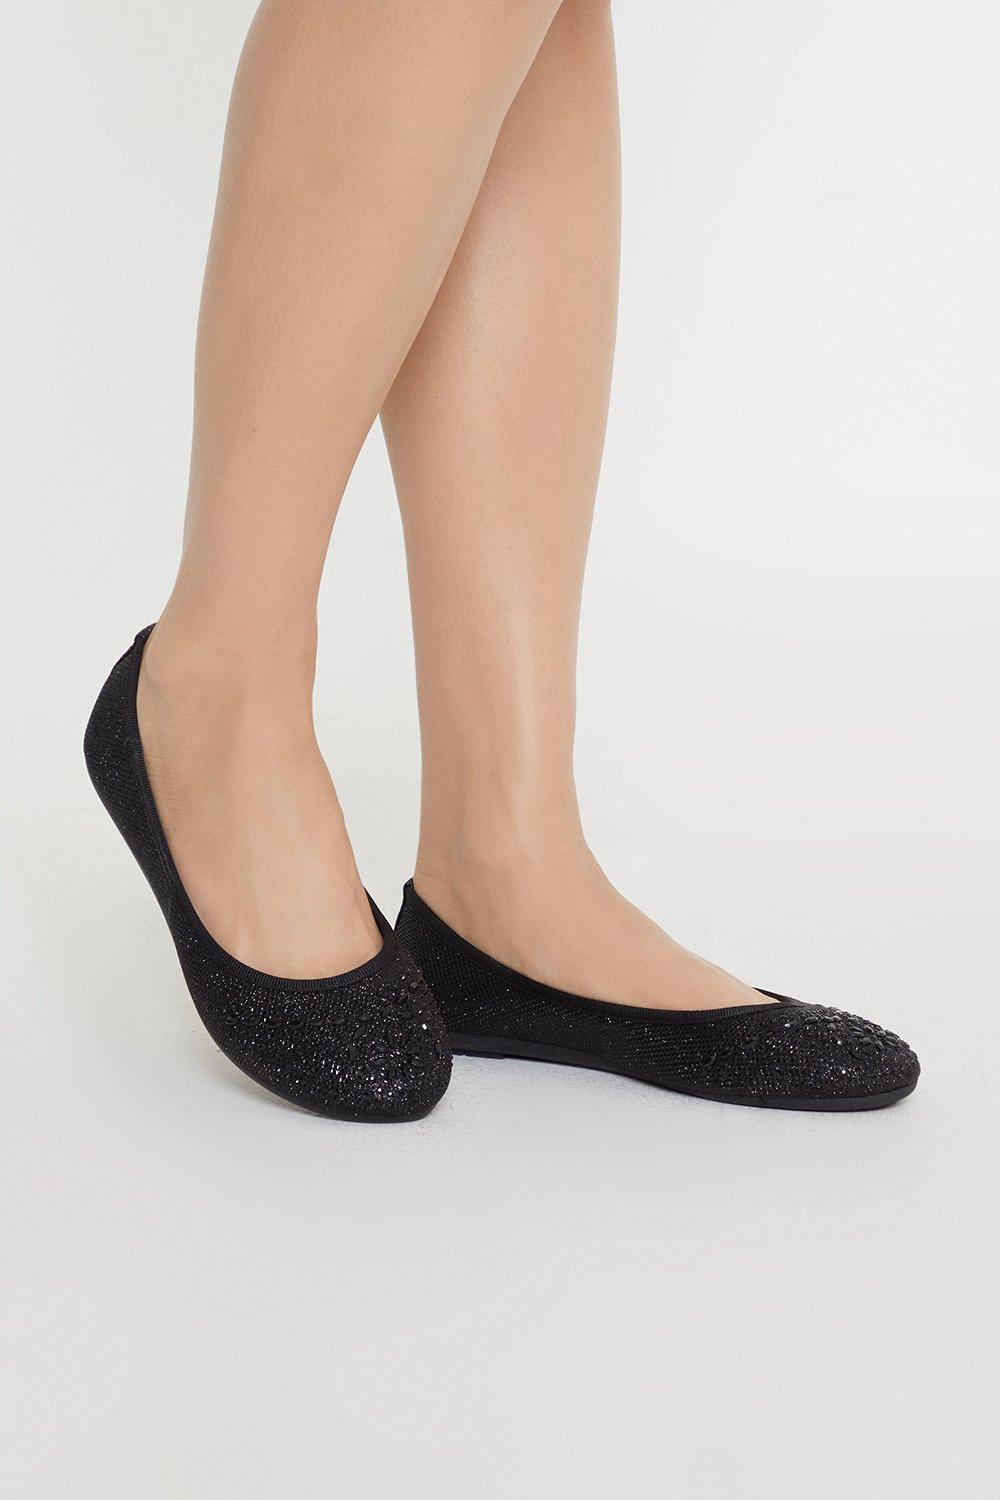 Womens Good For The Sole: Tammy Sparkly Comfort Ballet Flats